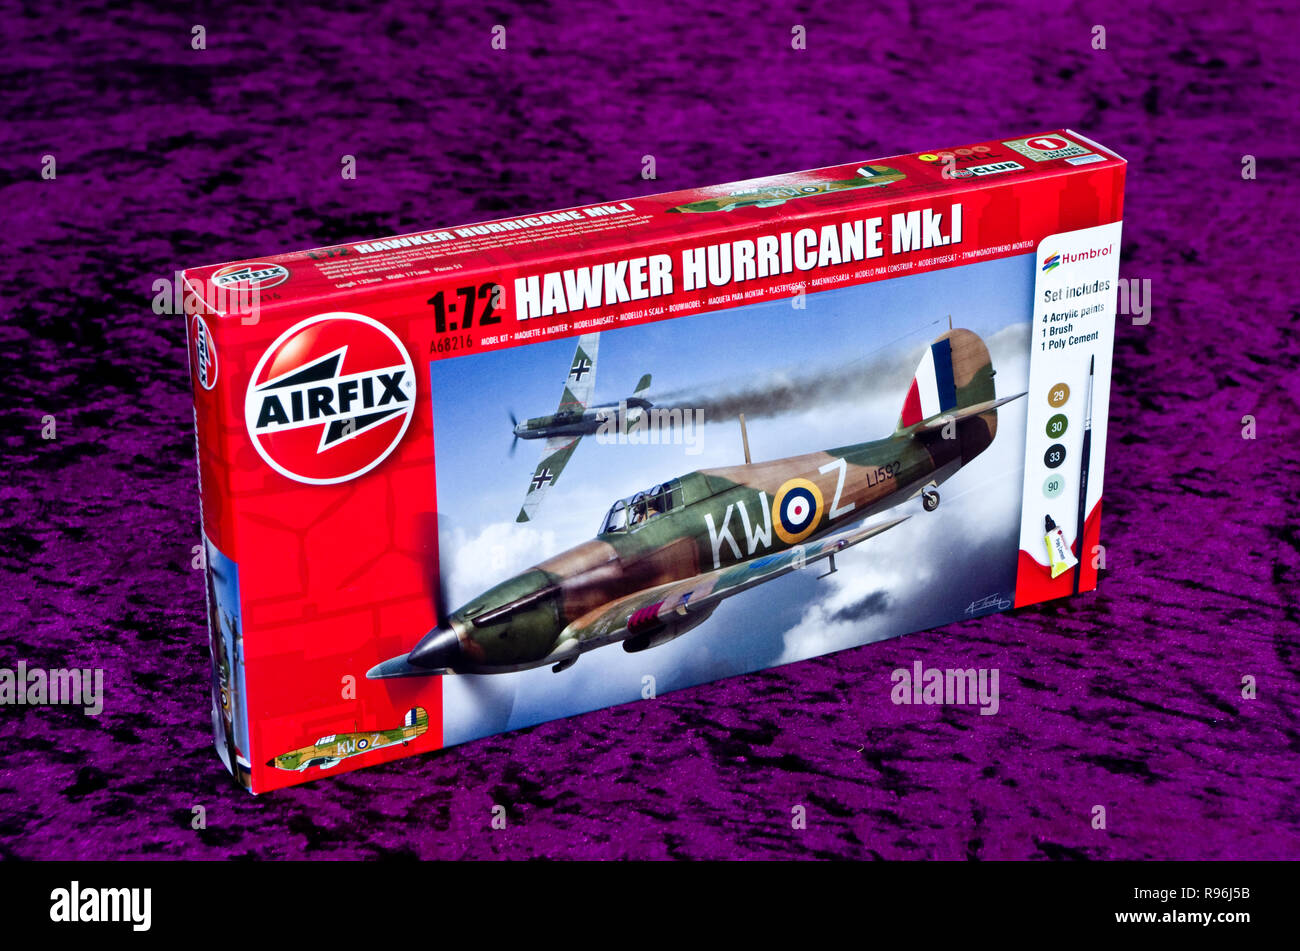 Airfix Model Kit of a Hawker Hurricane MK 1 Fighter Plane Stock Photo